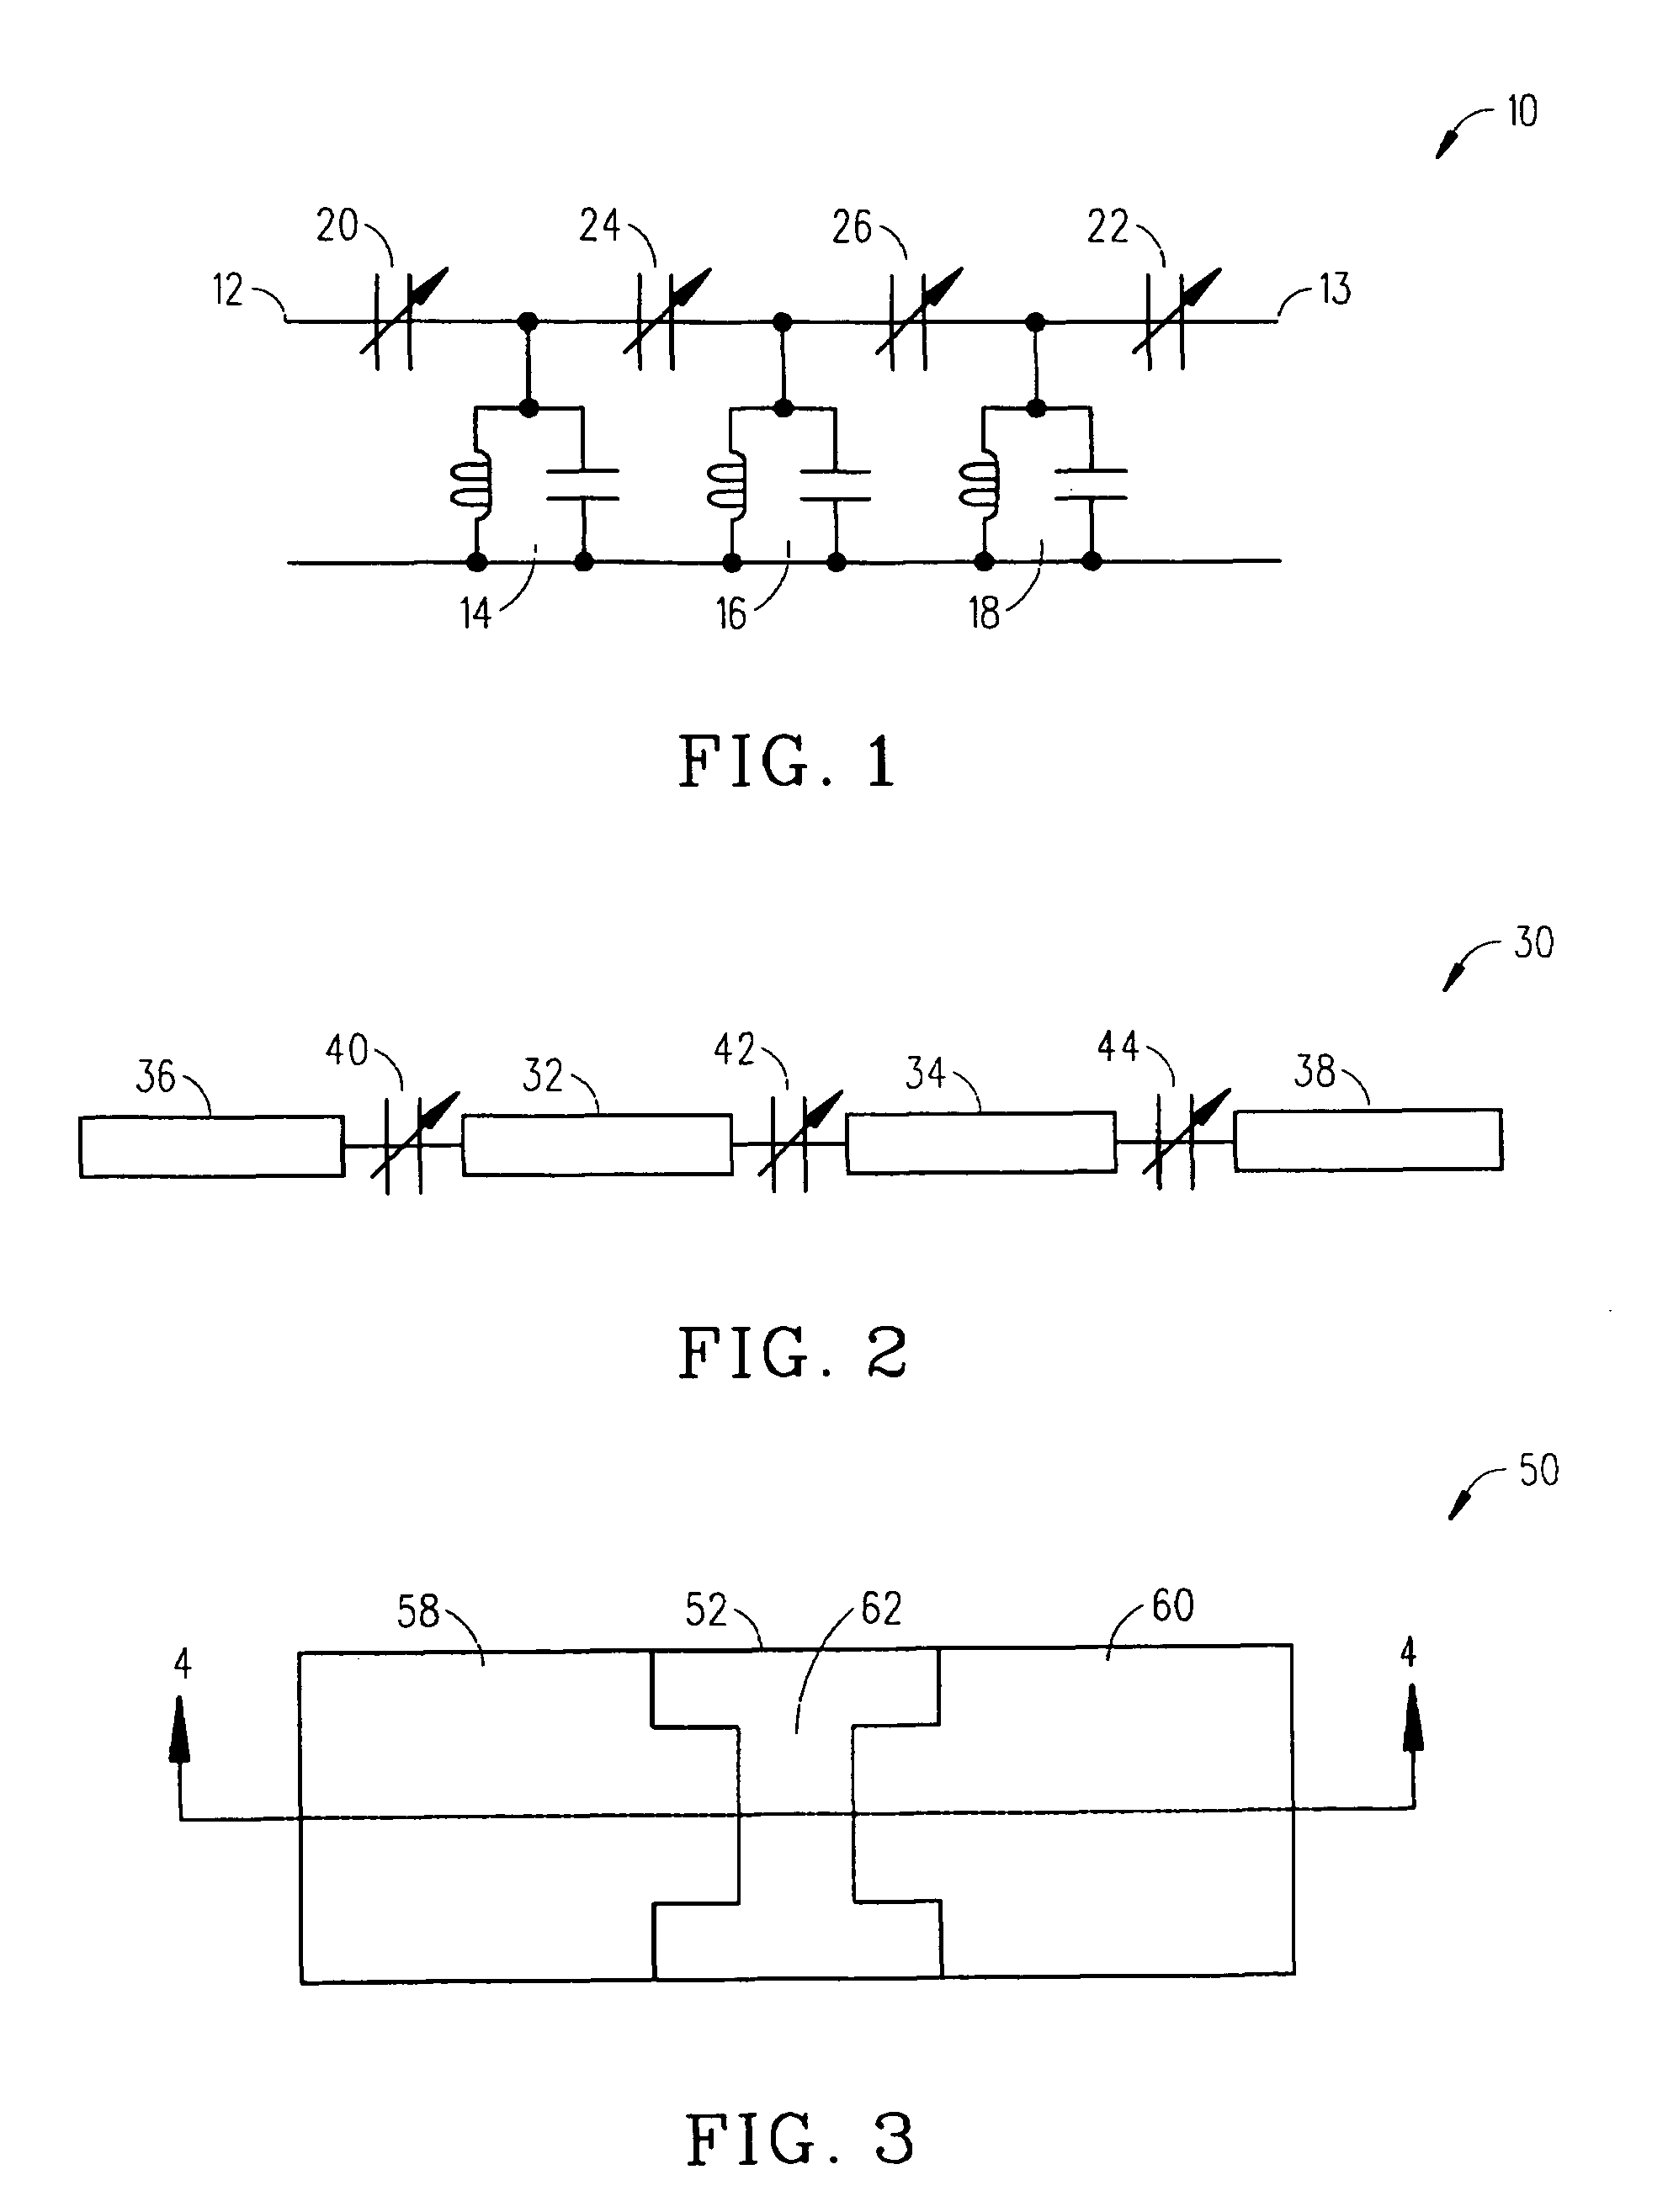 Tunable filters having variable bandwidth and variable delay